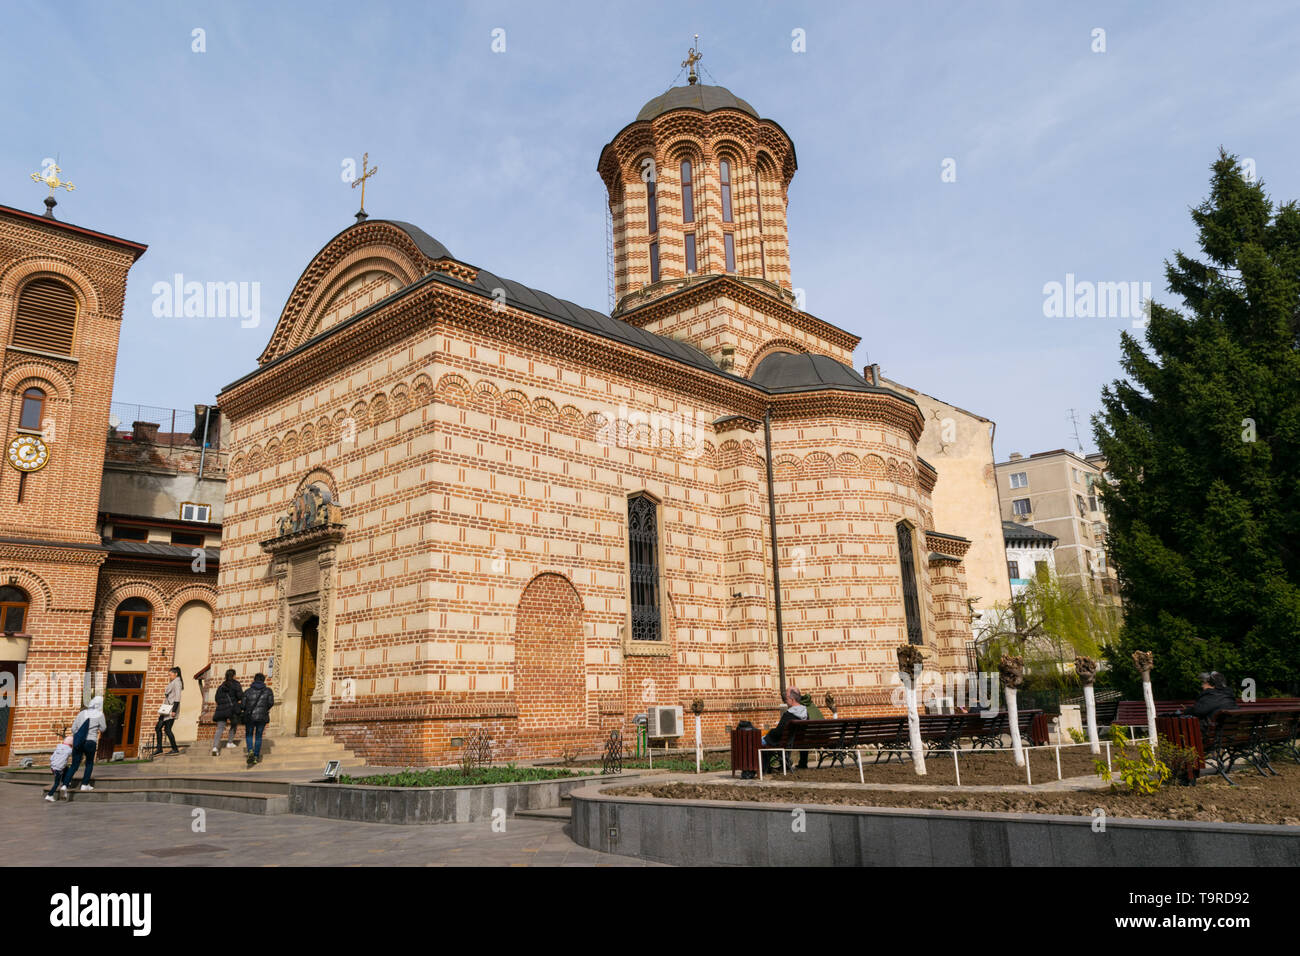 Bucharest, Romania - March 16, 2019: people visiting church 'Sfantul Antonie Curtea Veche' situated in Old Town part of Bucharest, Romania. Stock Photo